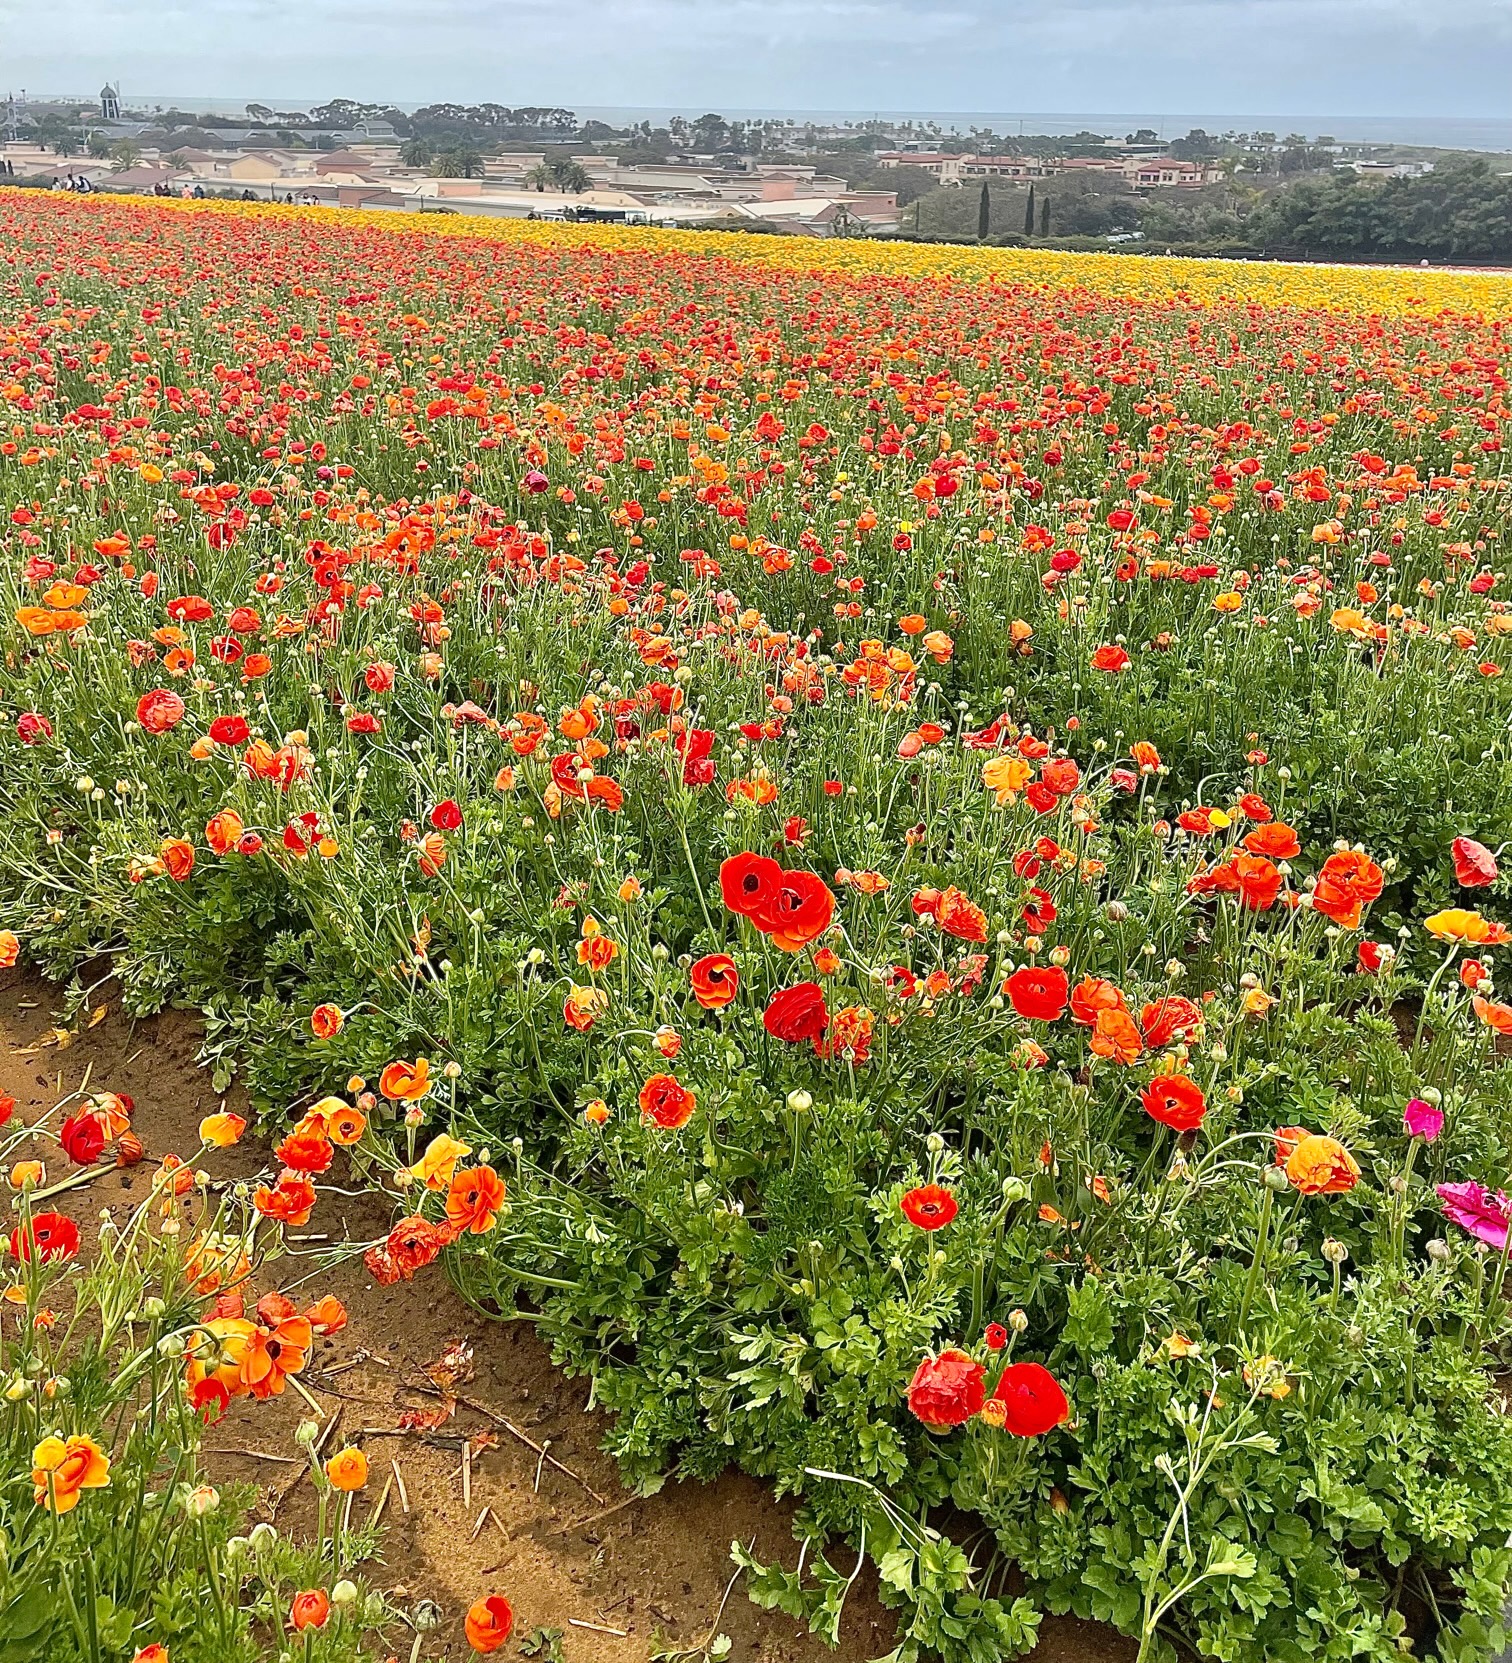 Living Colorfully at The Flower Fields in Carlsbad